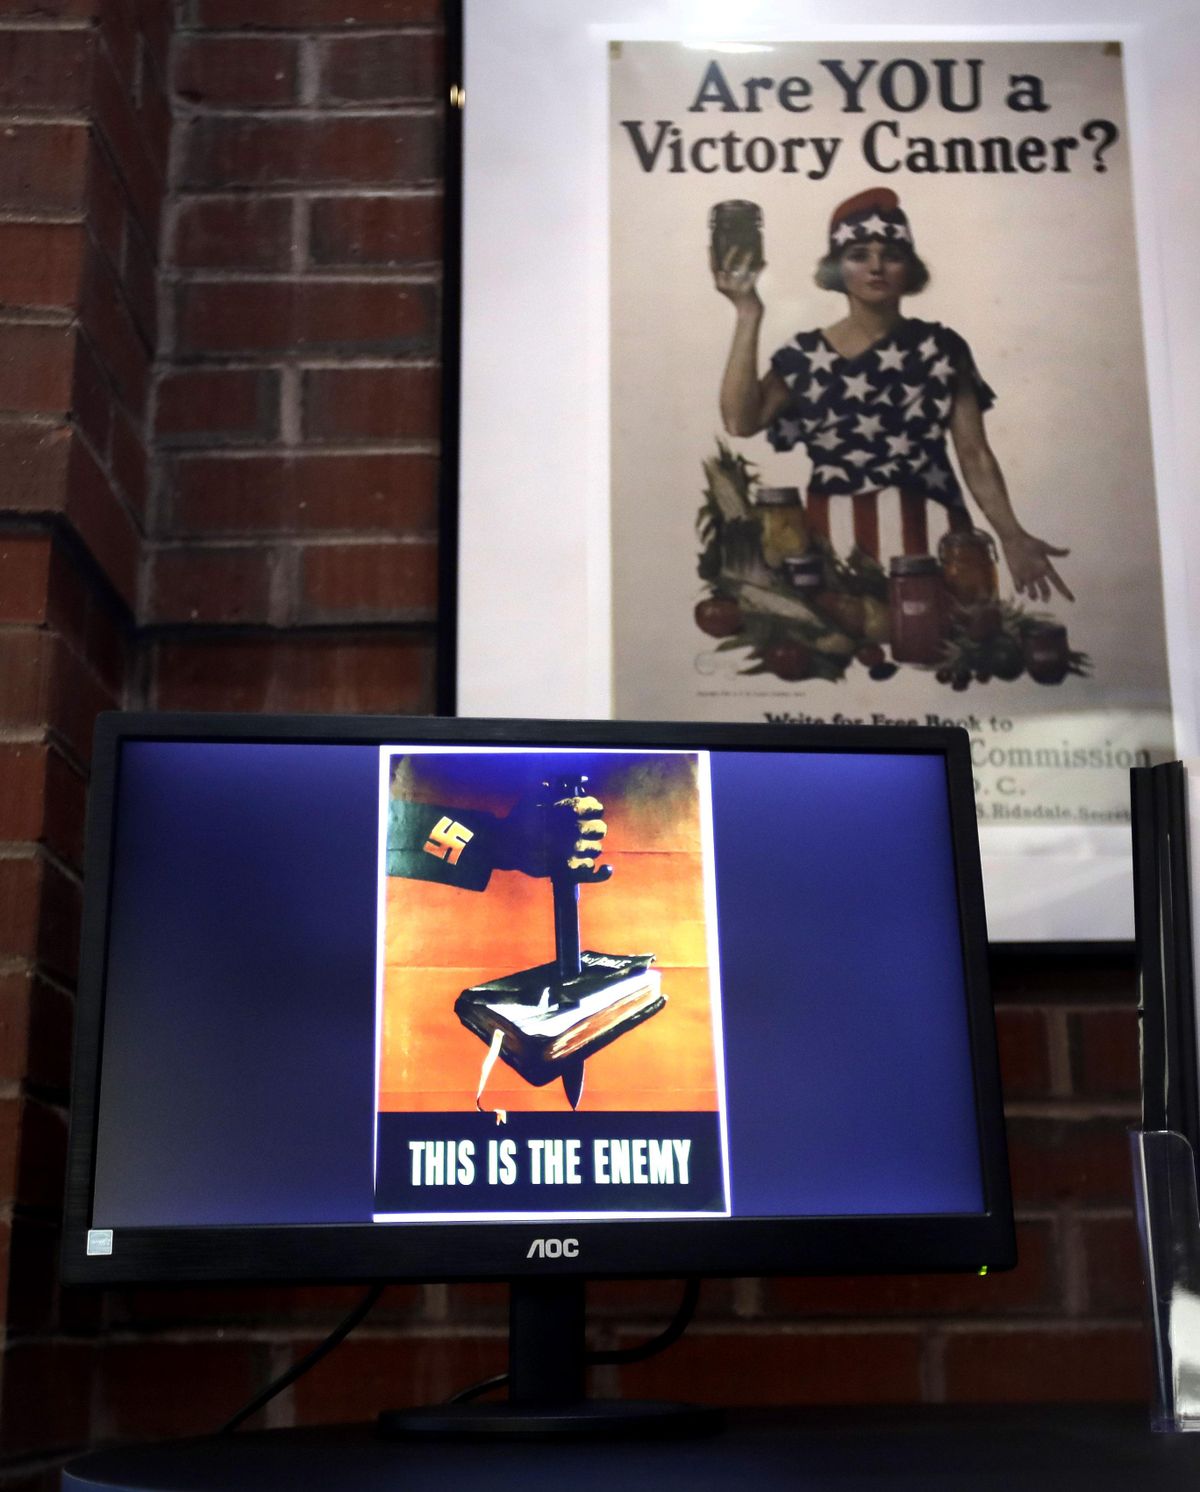 A National War Garden Commission poster copy hangs in a hallway as a display loop shows historic posters on monitor at the Rochester Public Library in Rochester, N.H., on Thursday, Nov. 8, 2018. A trove of propaganda posters from World War I and II were found recently found after being lost in storage for decades in the library’s basement. (Charles Krupa / AP)